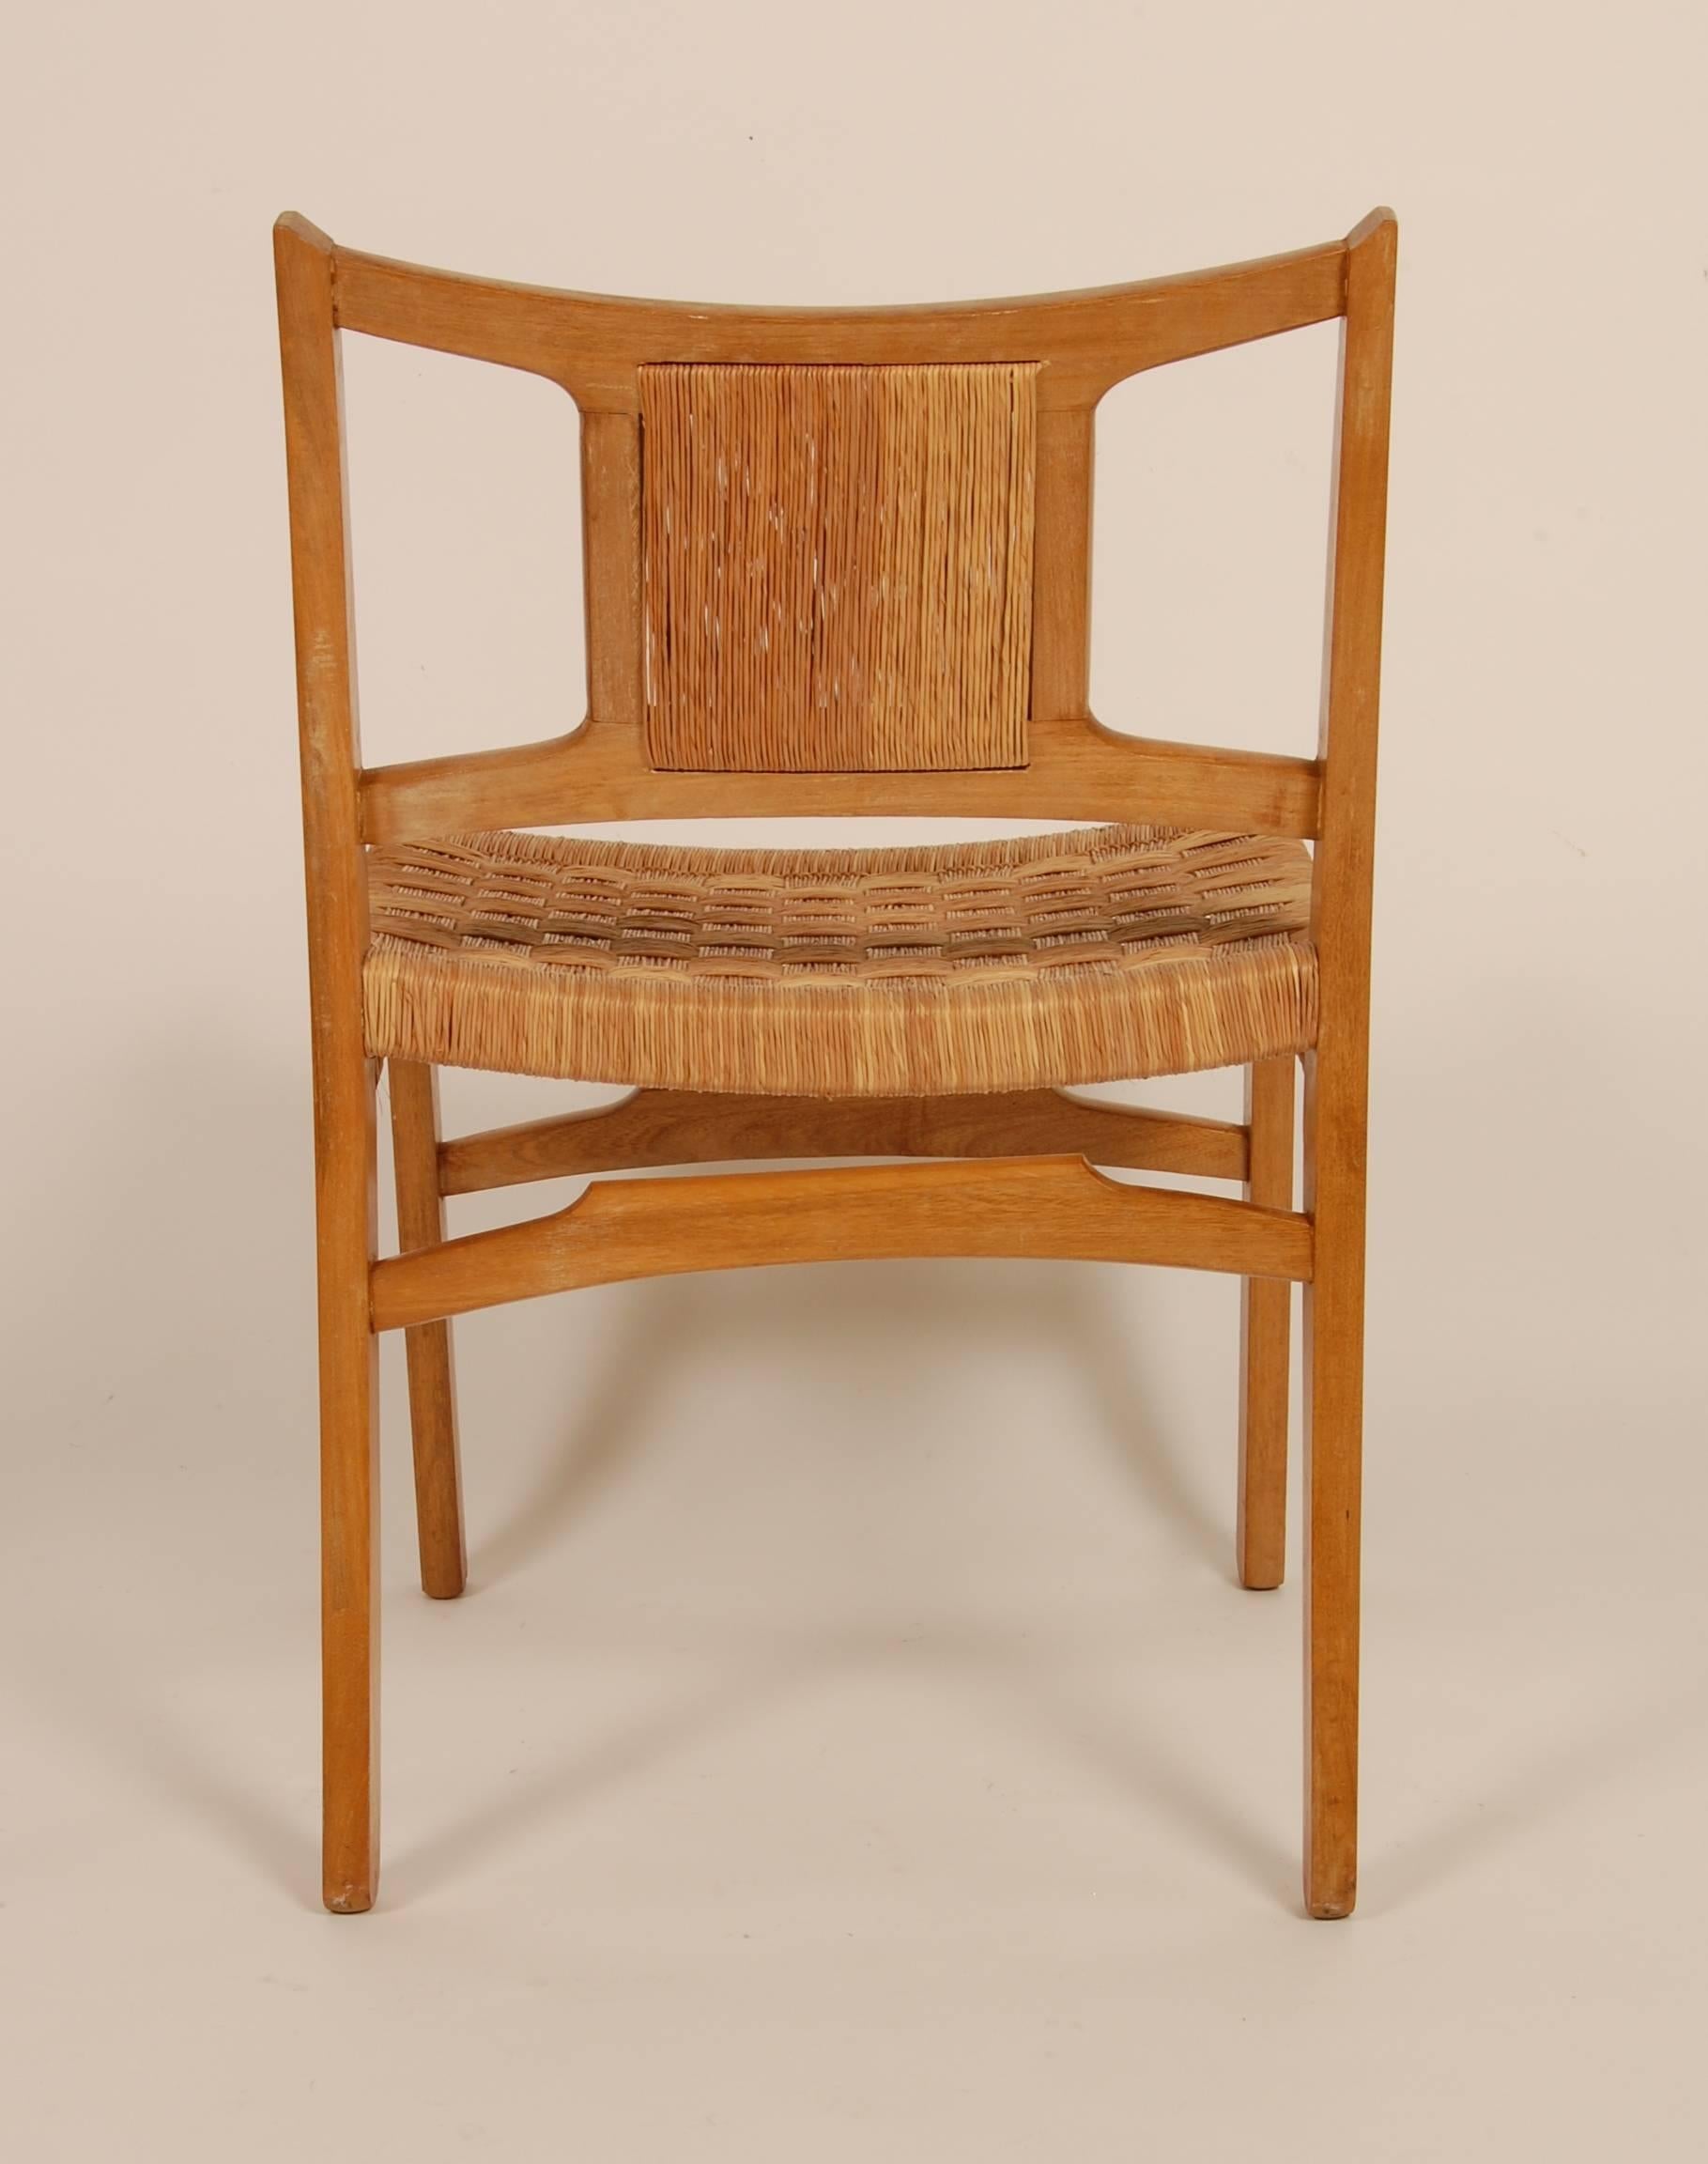 Edmond Spence Side Chair for Industria Mueblera of Mexico 1